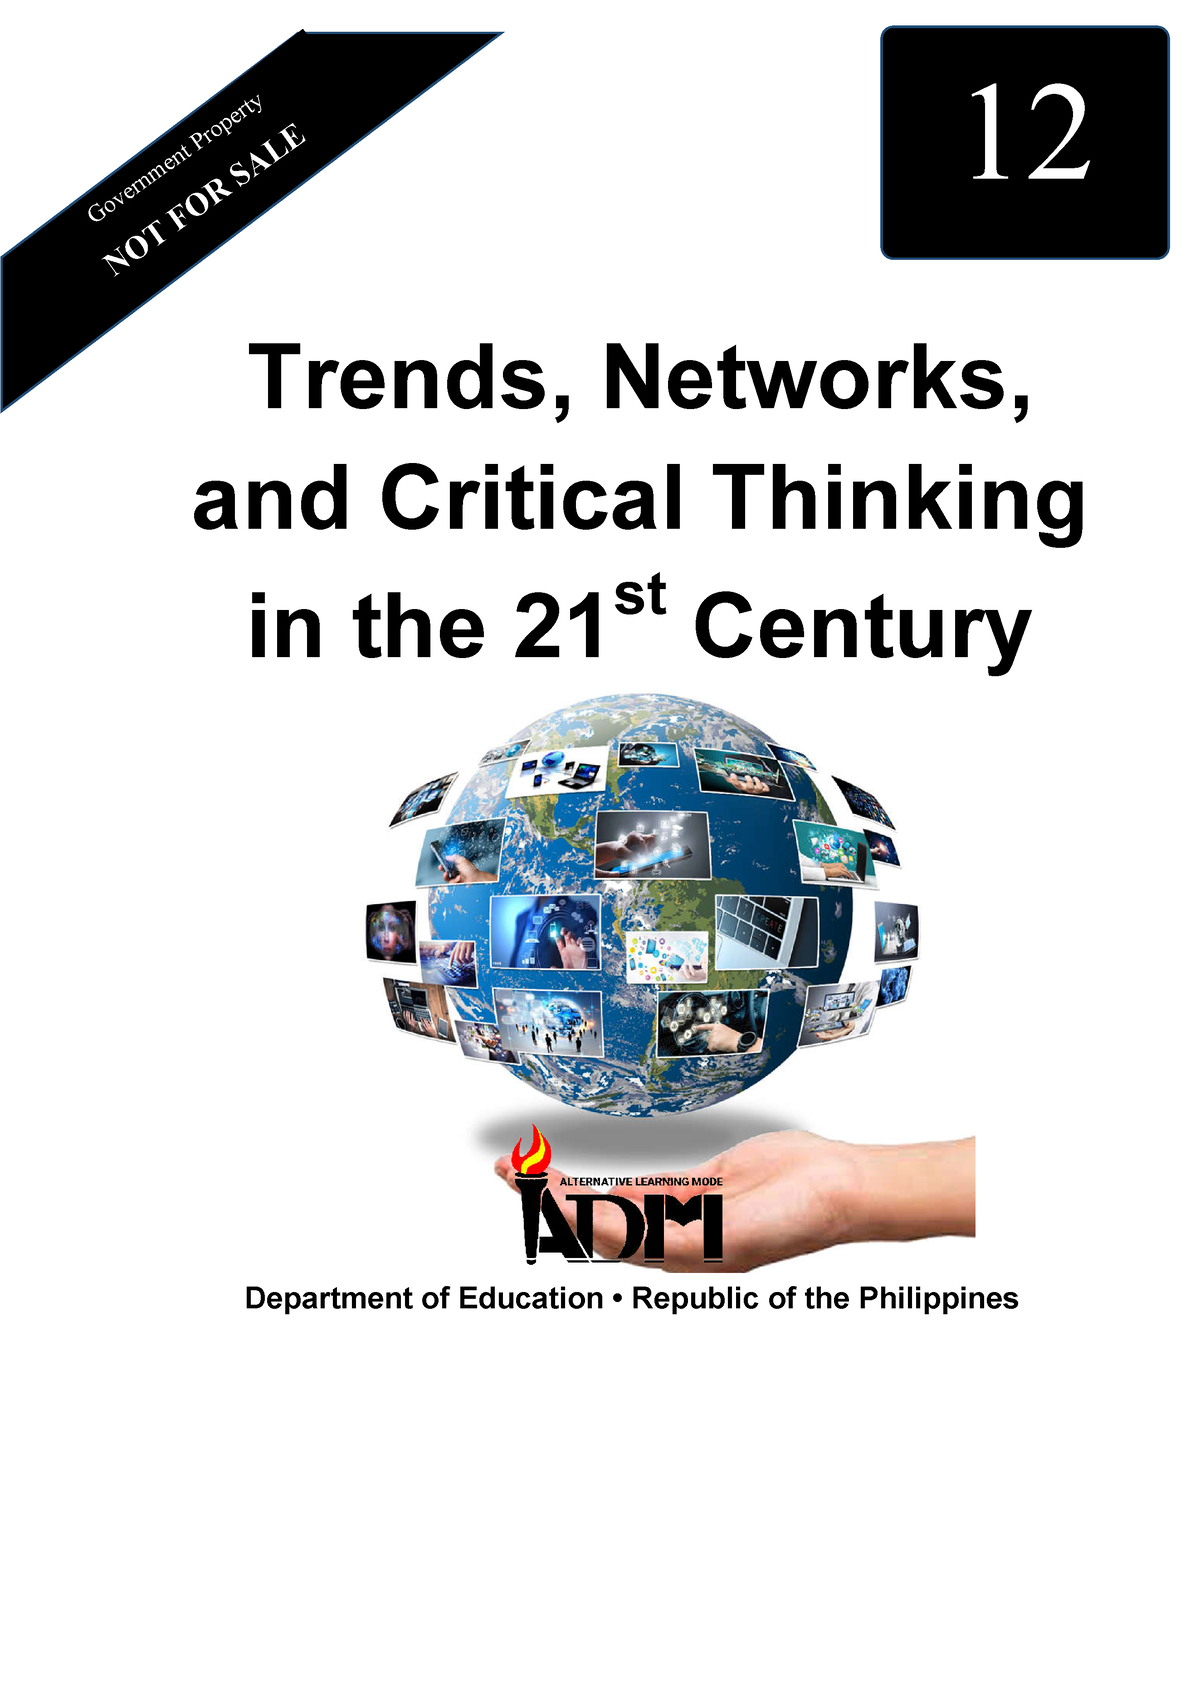 trends networks and critical thinking quarter 2 module 4